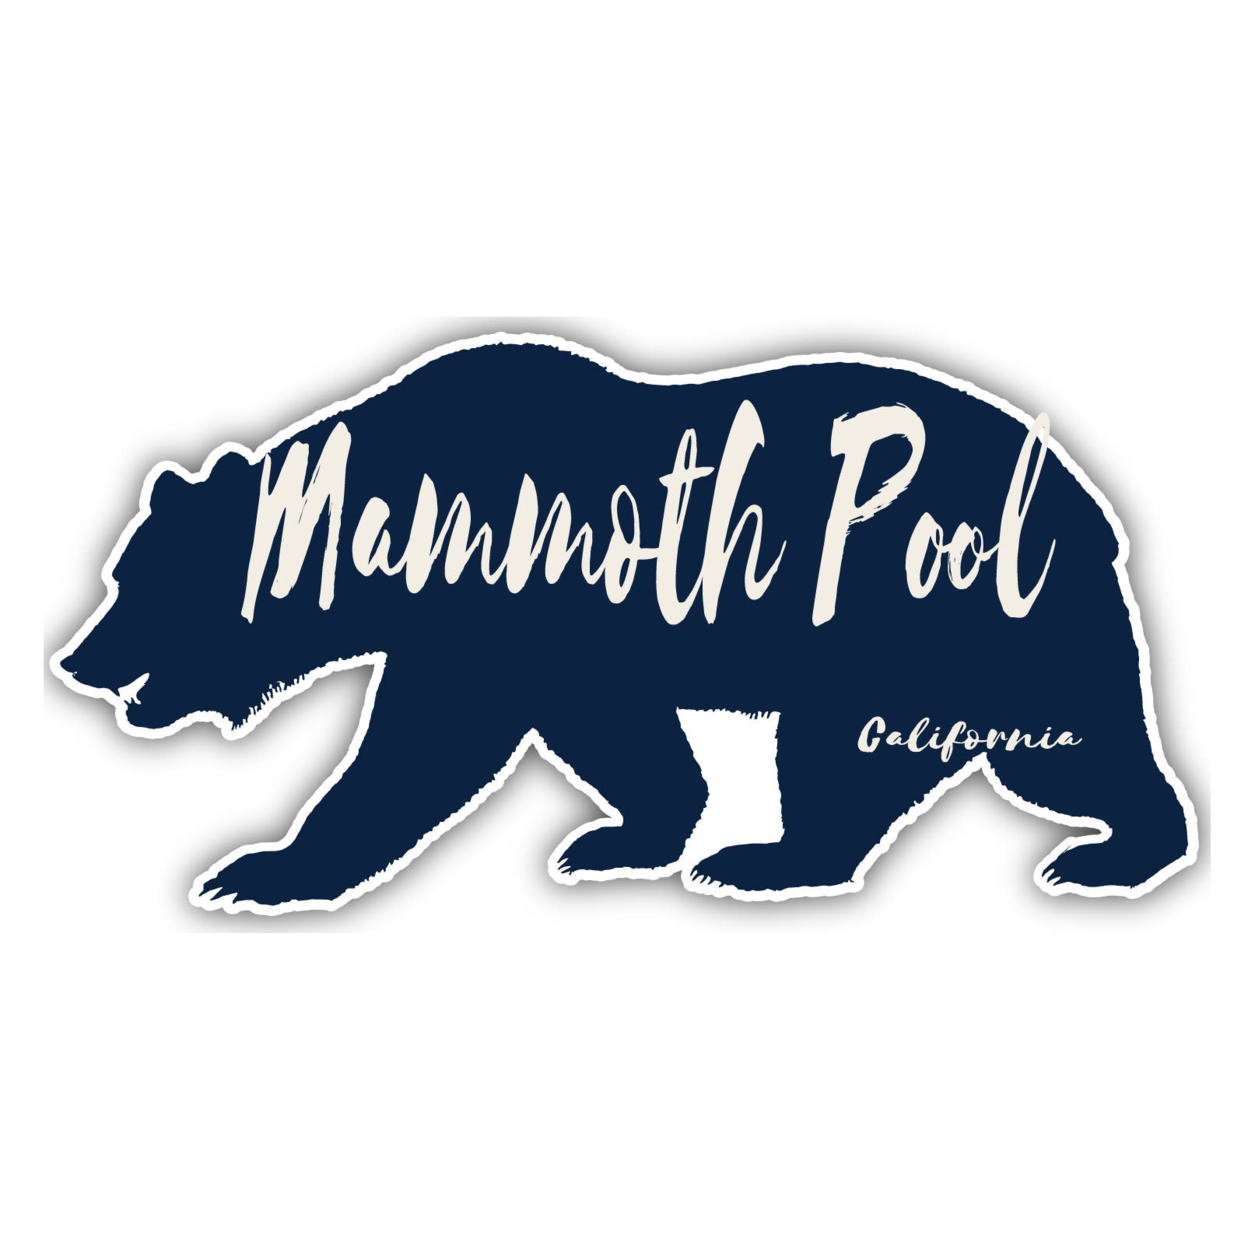 Mammoth Pool California Souvenir Decorative Stickers (Choose Theme And Size) - 2-Inch, Bear